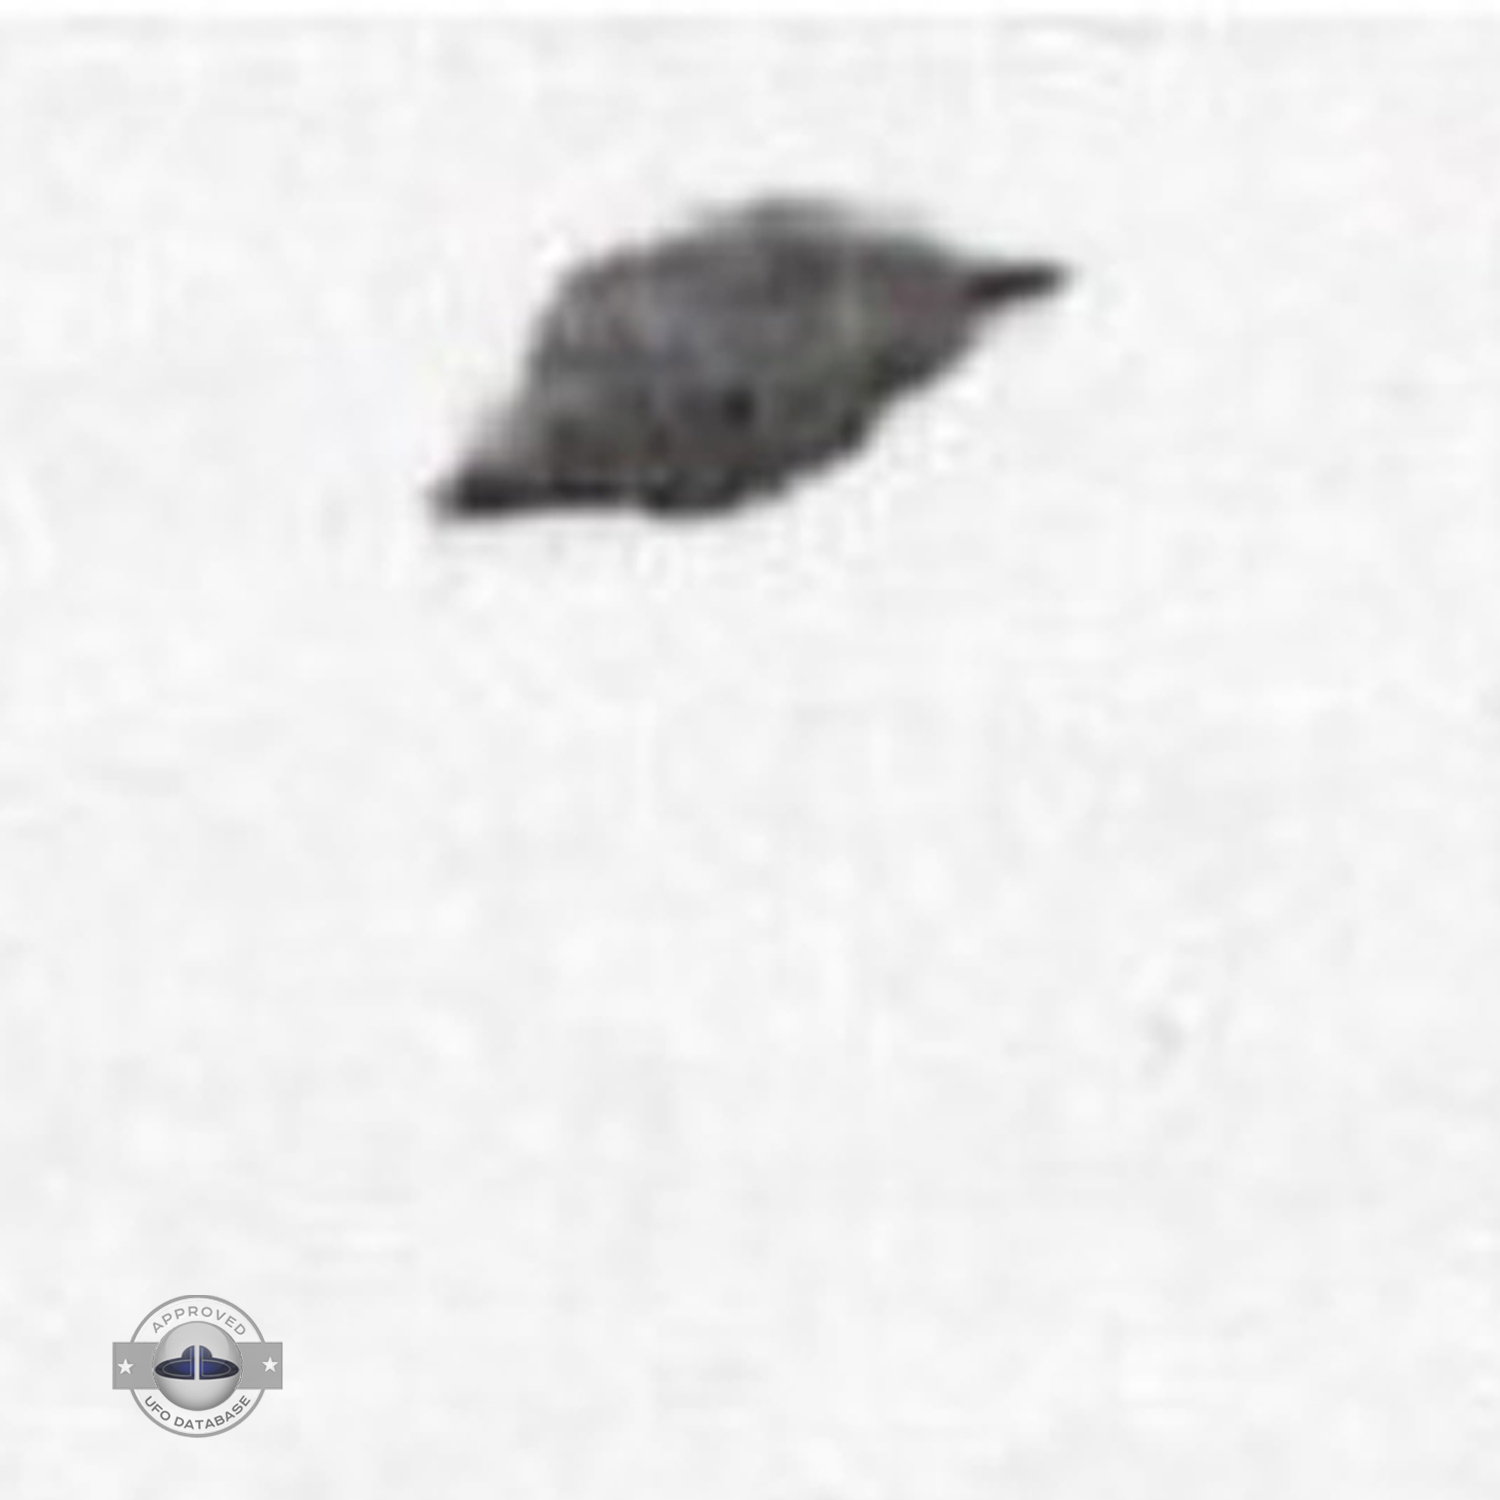 UFO sighting occurred in a small town Vidnoye in the Moscow Oblast UFO Picture #159-4